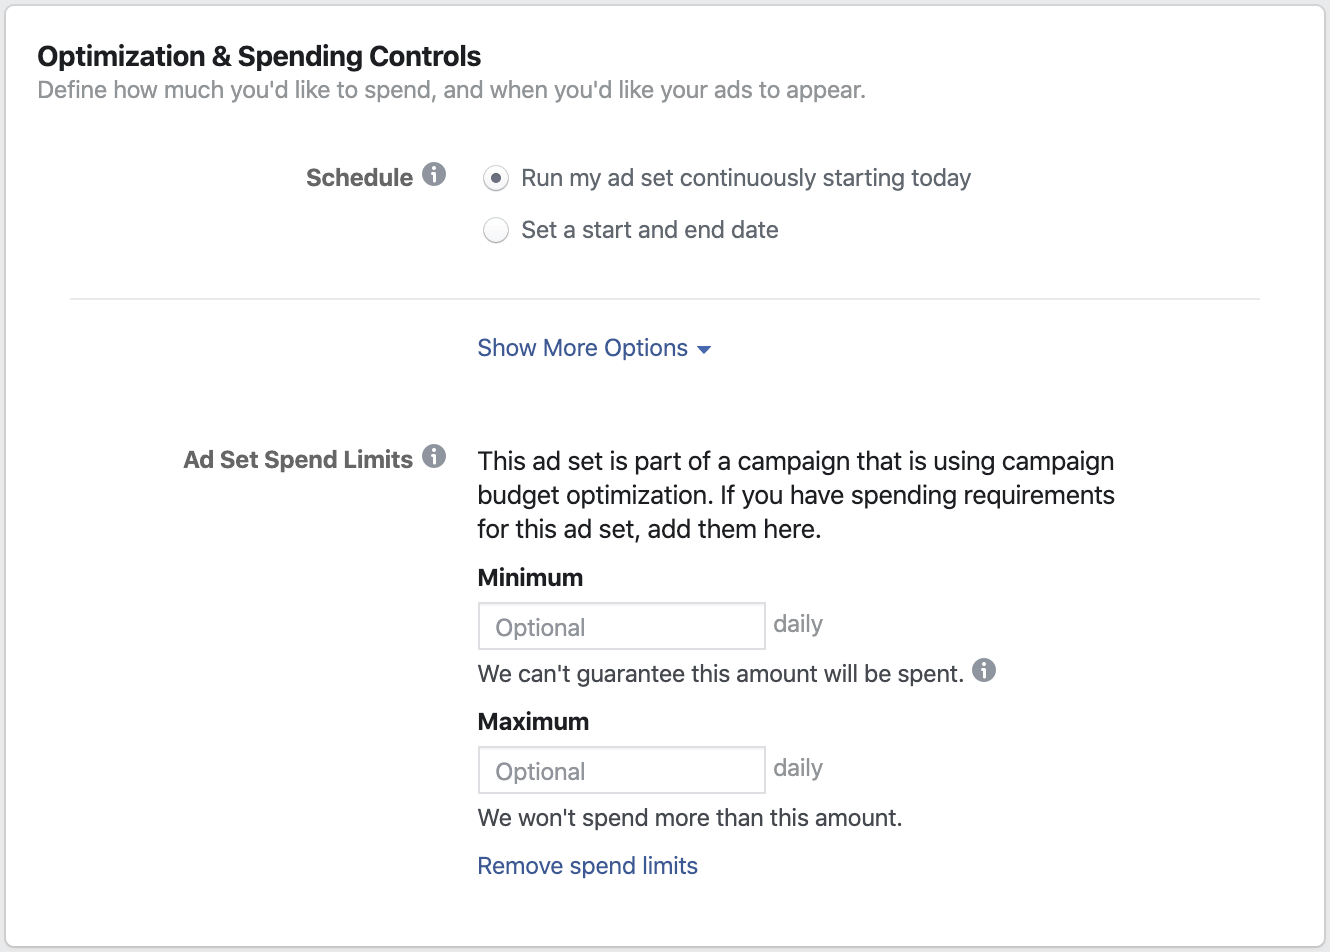 Screenshot of the 'Optimizations & Spending Controls' settings with minimum and maximum spend limits.